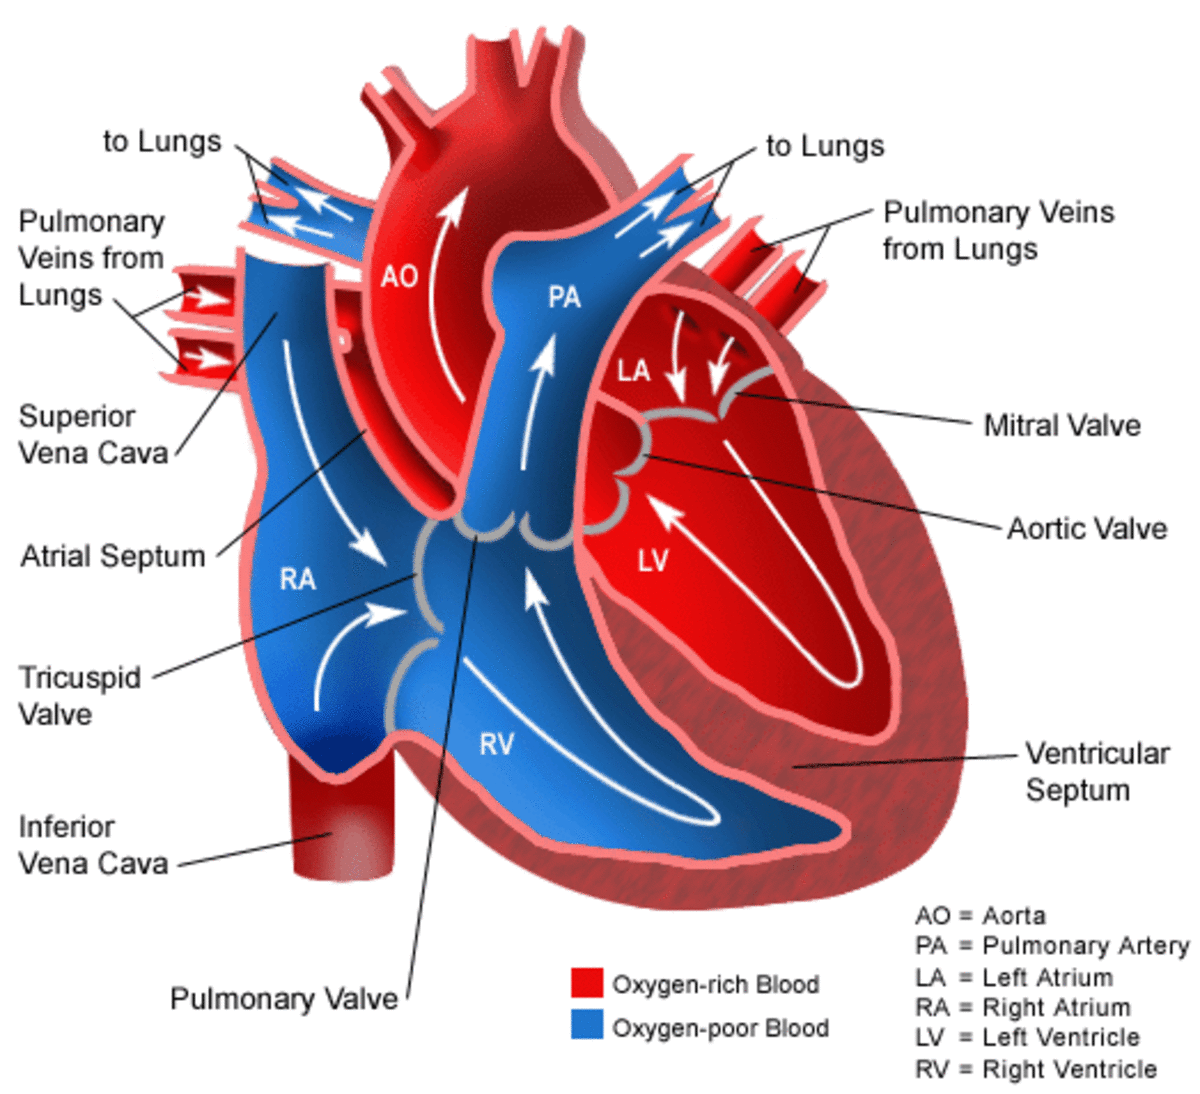 Anatomy of the Heart.  Blood from starts in Right Atrium (RA), to Right Ventricle (RV), into pulmonary arteries, into pulmonary veins, through Left Atrium(LA),fillings the Left Ventricle(LV) and into the Aorta.